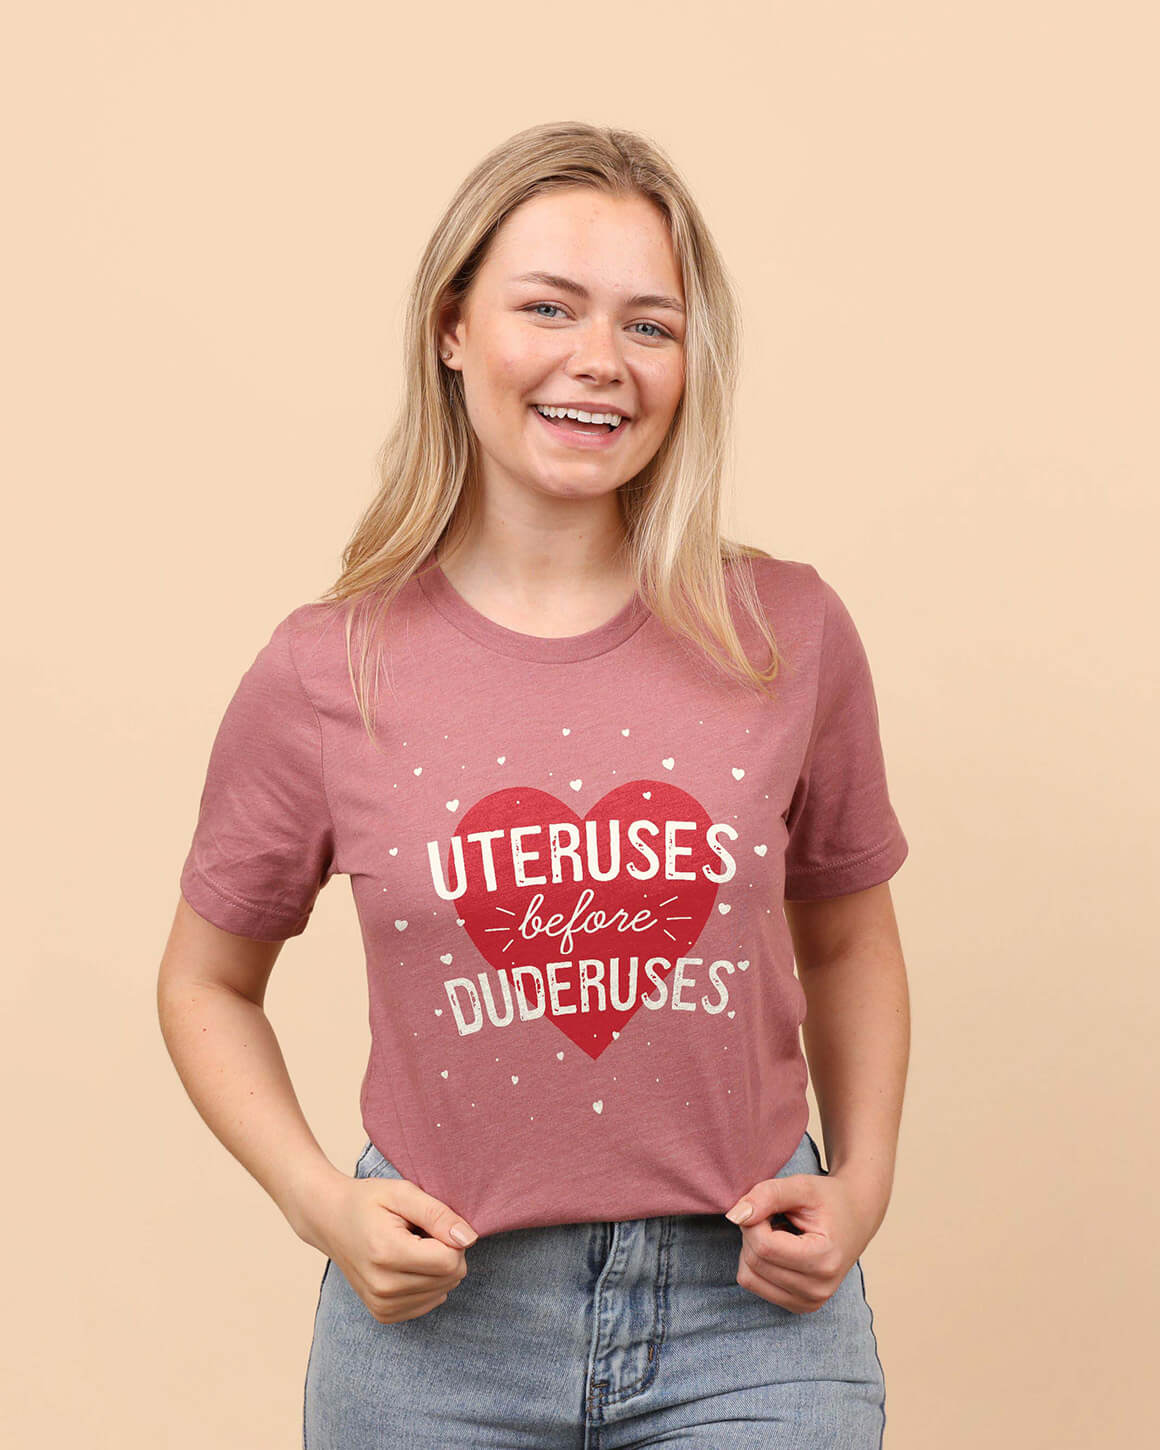 Galentine's Day t-shirt that boldly states uteruses before duderuses